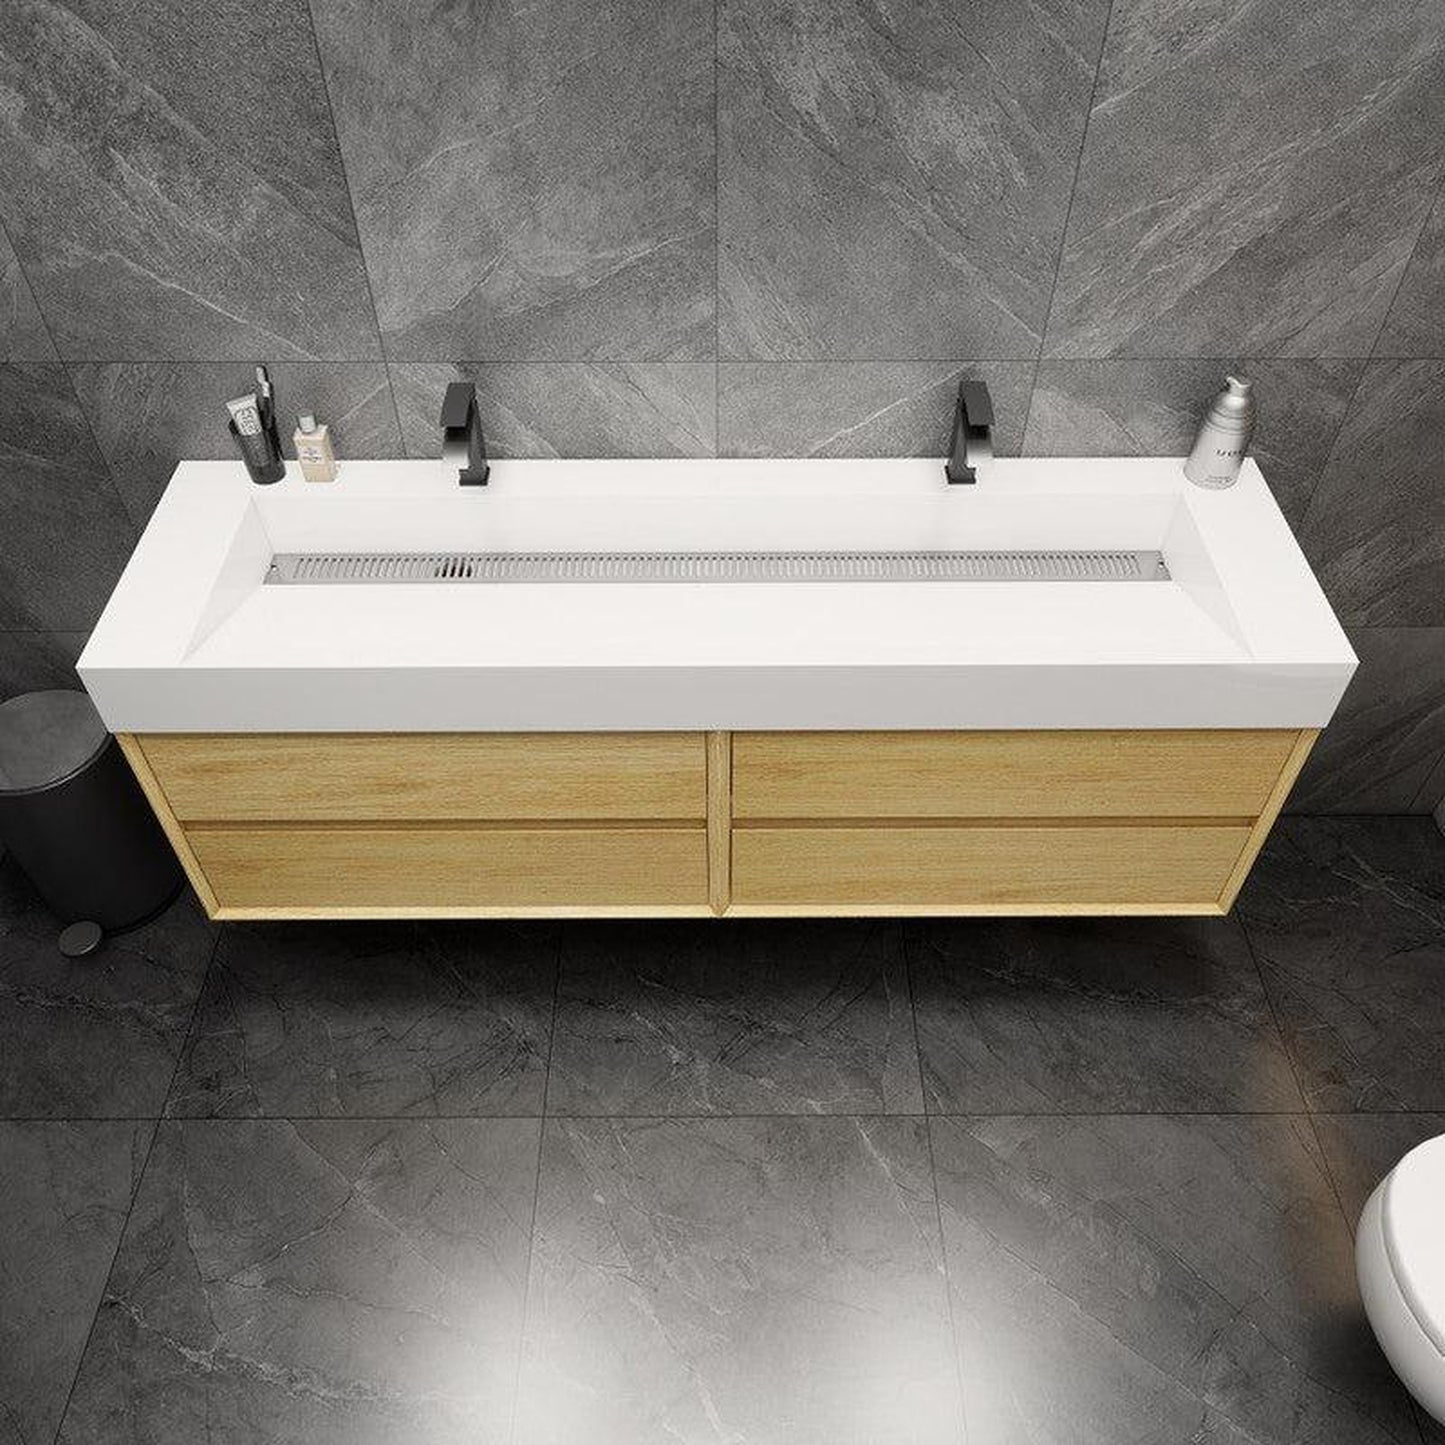 Moreno Bath MAX 72" Teak Oak Wall-Mounted Vanity With Double Faucet Holes and Reinforced White Acrylic Sink